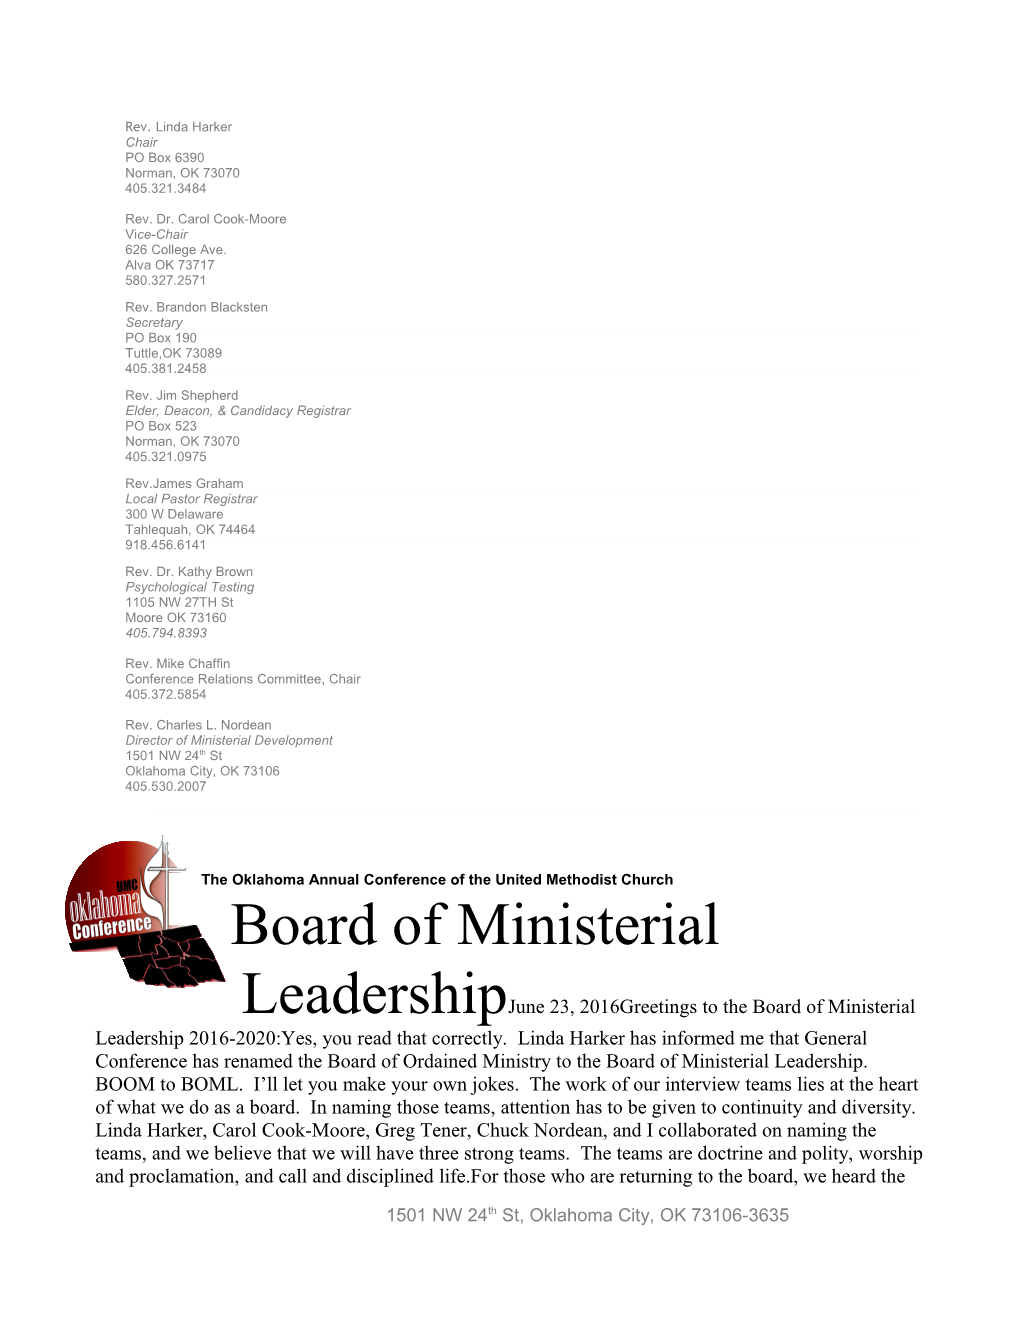 Greetings to the Board of Ministerial Leadership 2016-2020